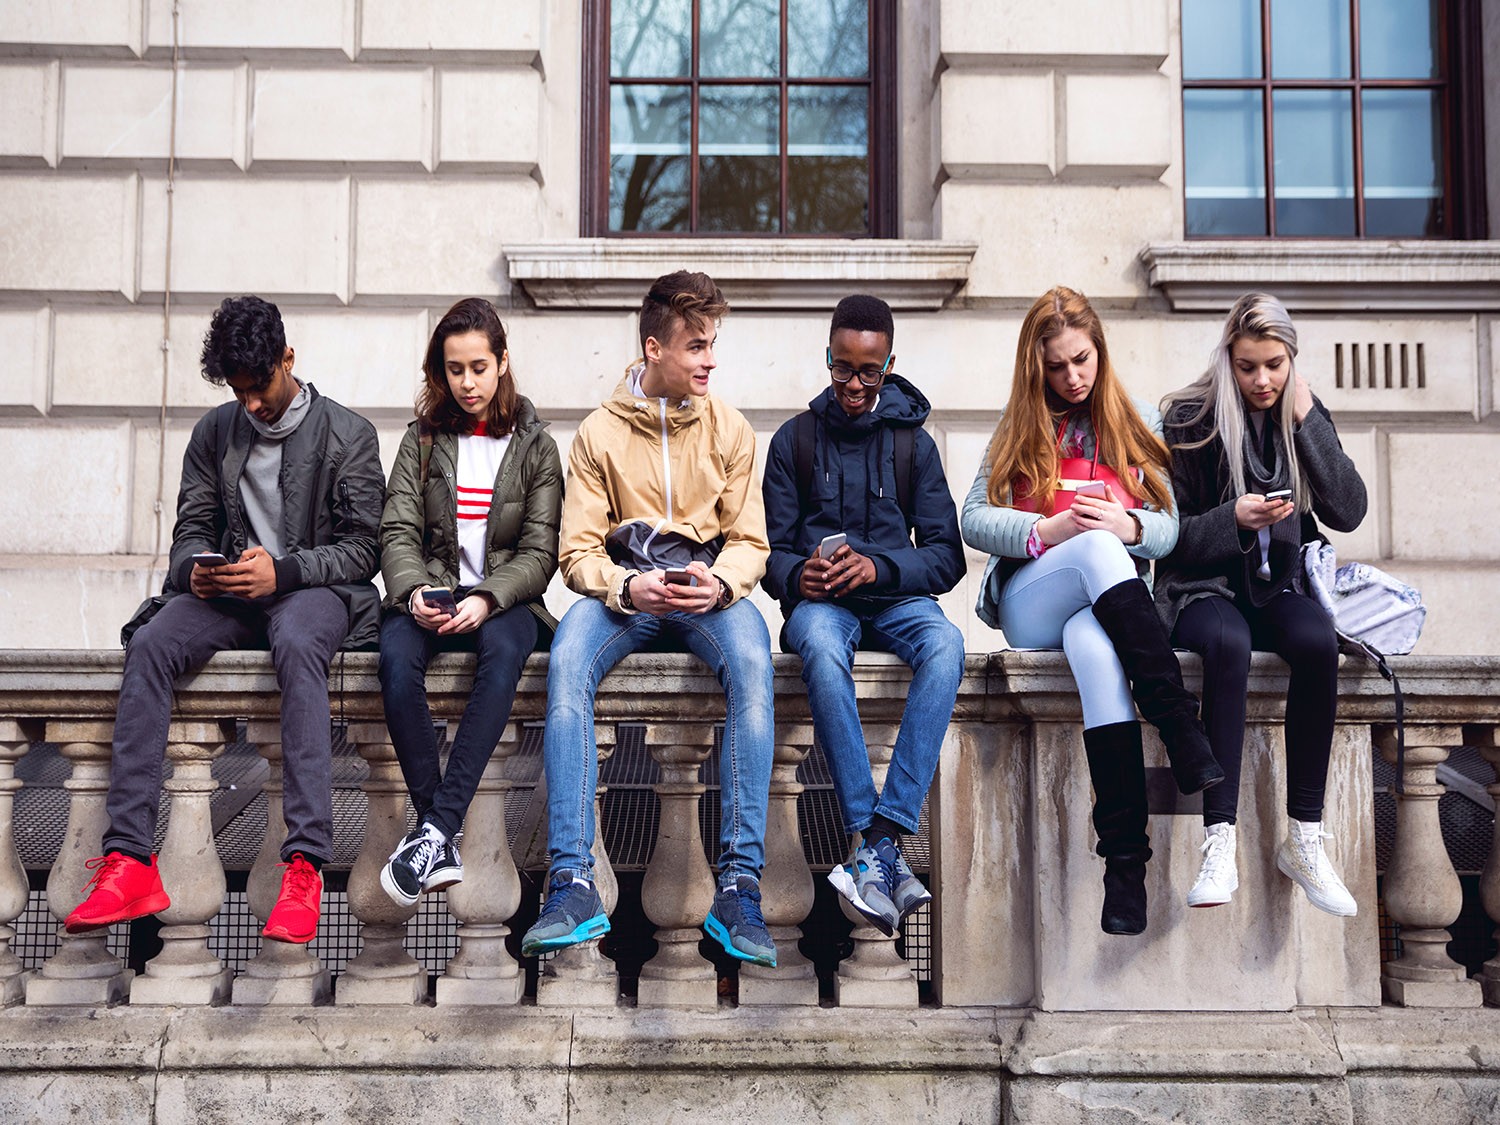 Students sitting on stone wall outside of university building